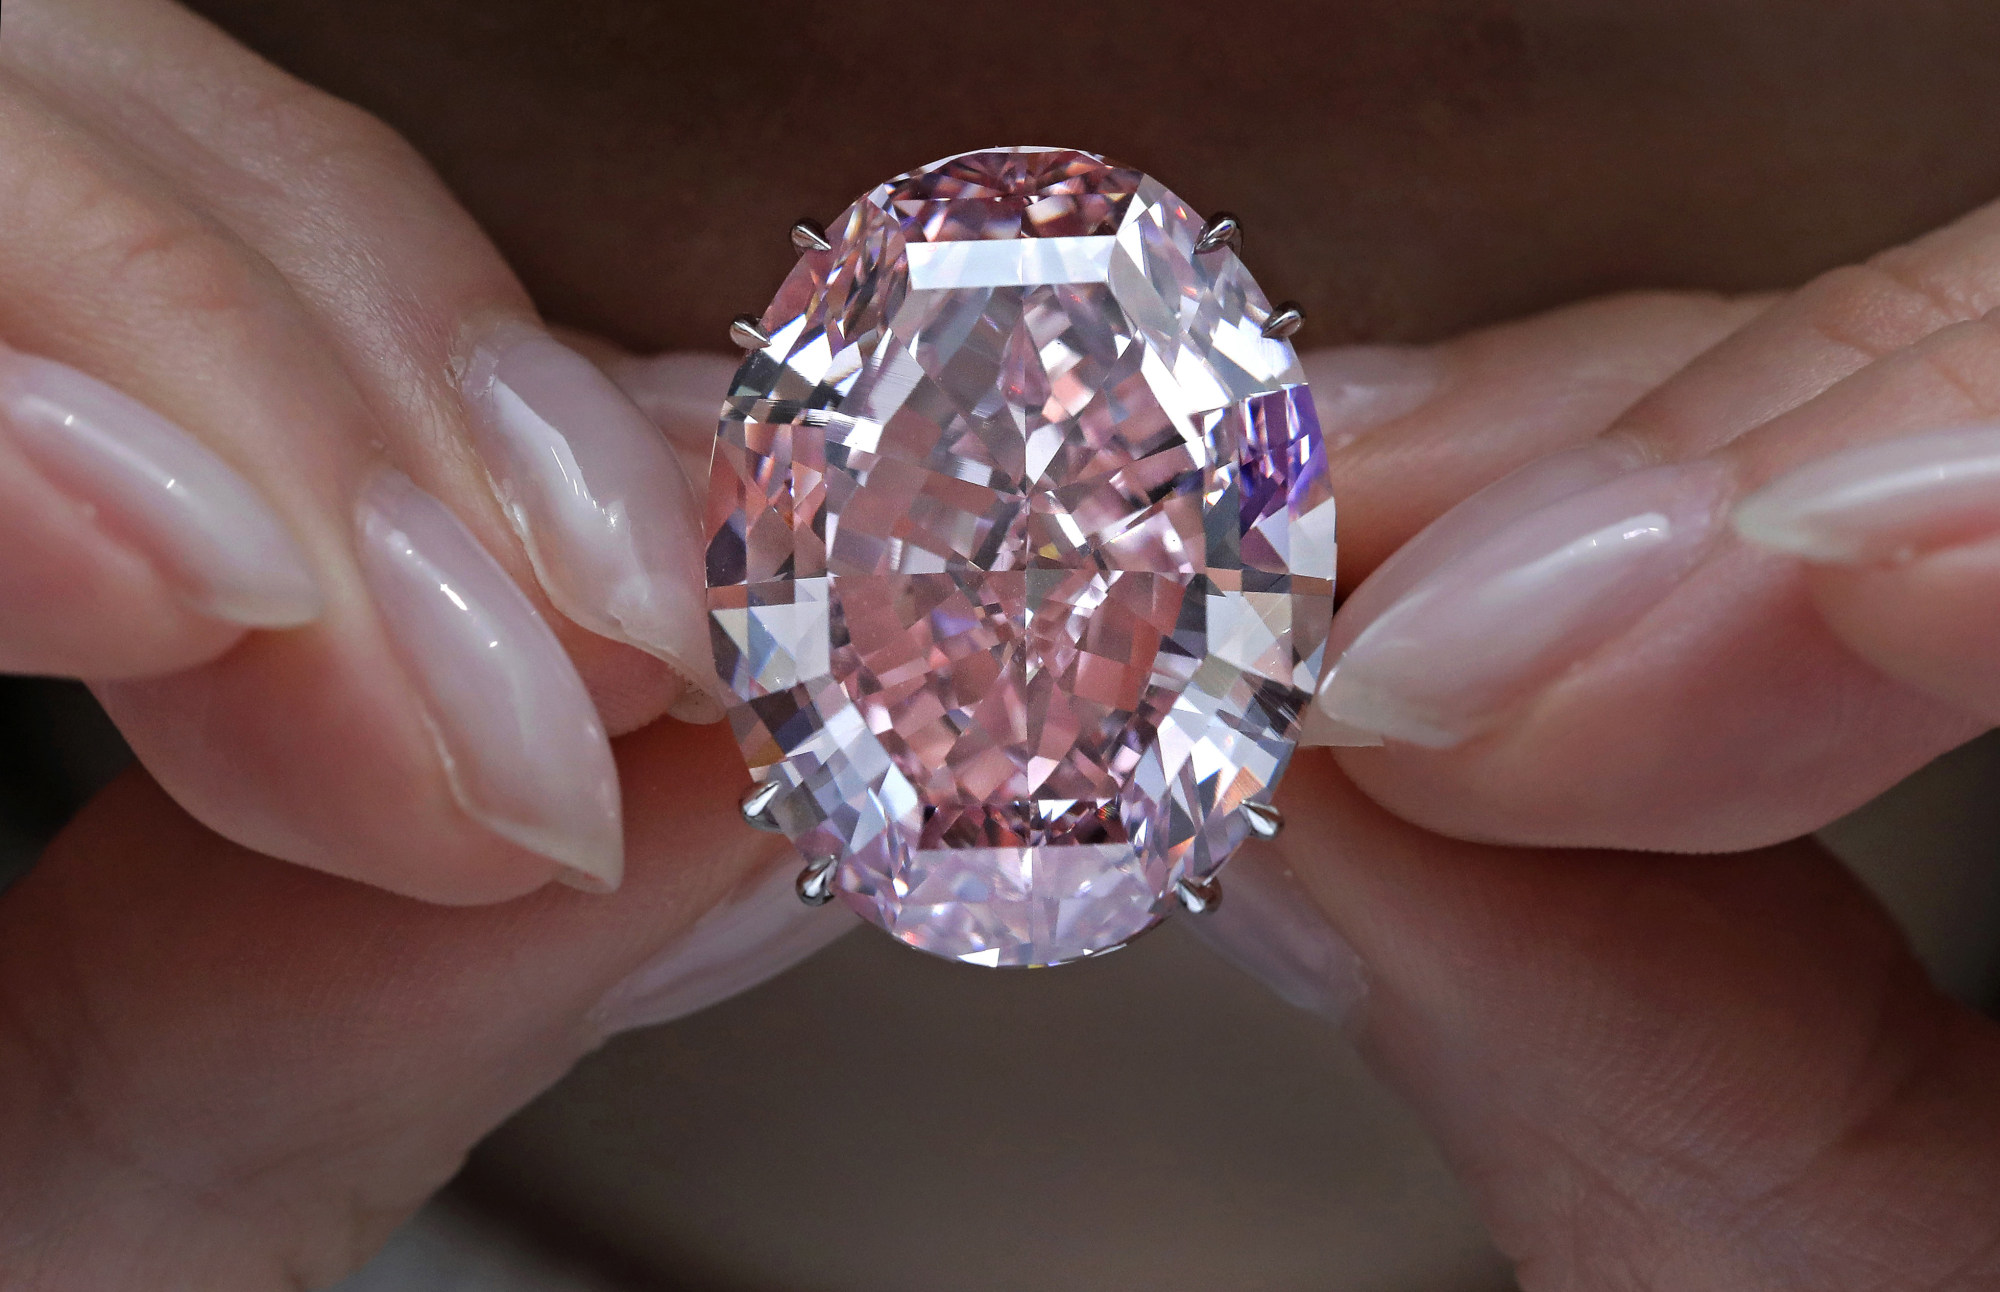 Rare pink diamond is largest such gemstone found in 300 years l